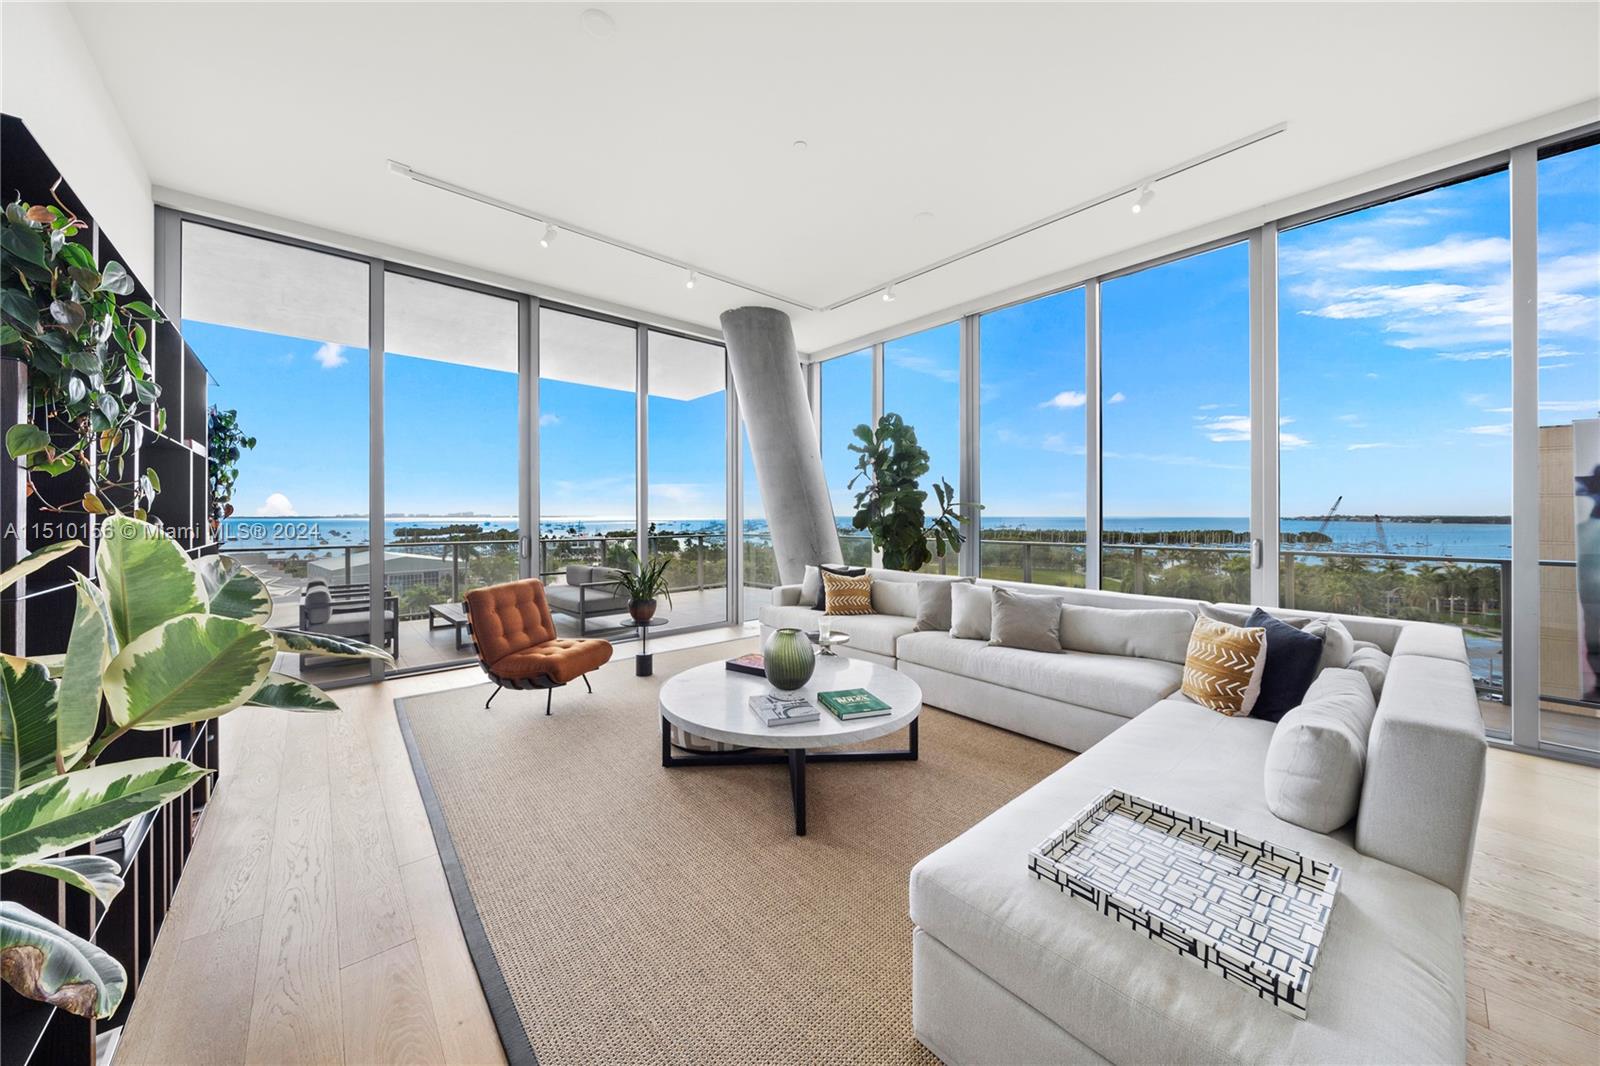 Welcome to Unit 702S at the Grove at Grand Bay in Coconut Grove. This stunning 3,929 SF property is being offered FULLY FURNISHED (art excluded), 4 beds+staff, 5.1 baths, and exquisite finishes. Enjoy panoramic views of Biscayne Bay & the Miami skyline featuring 12-ft-high, floor-to-ceiling glass leading to wraparound terraces that are 12 ft deep. A spacious primary bedroom w/ ocean views & an expansive walk-in closet & primary bath. W/ 3 additional bedrooms, each w/ ensuite baths & closets + an extra service bed w/ full bath & powder bath. The kitchen is a chef's dream w/ top-of-the-line Miele appliances. Residents can enjoy the best amenities, from concierge services to a restaurant, spa, fitness center, swimming pool & walking distance to some of the best school's in Miami.